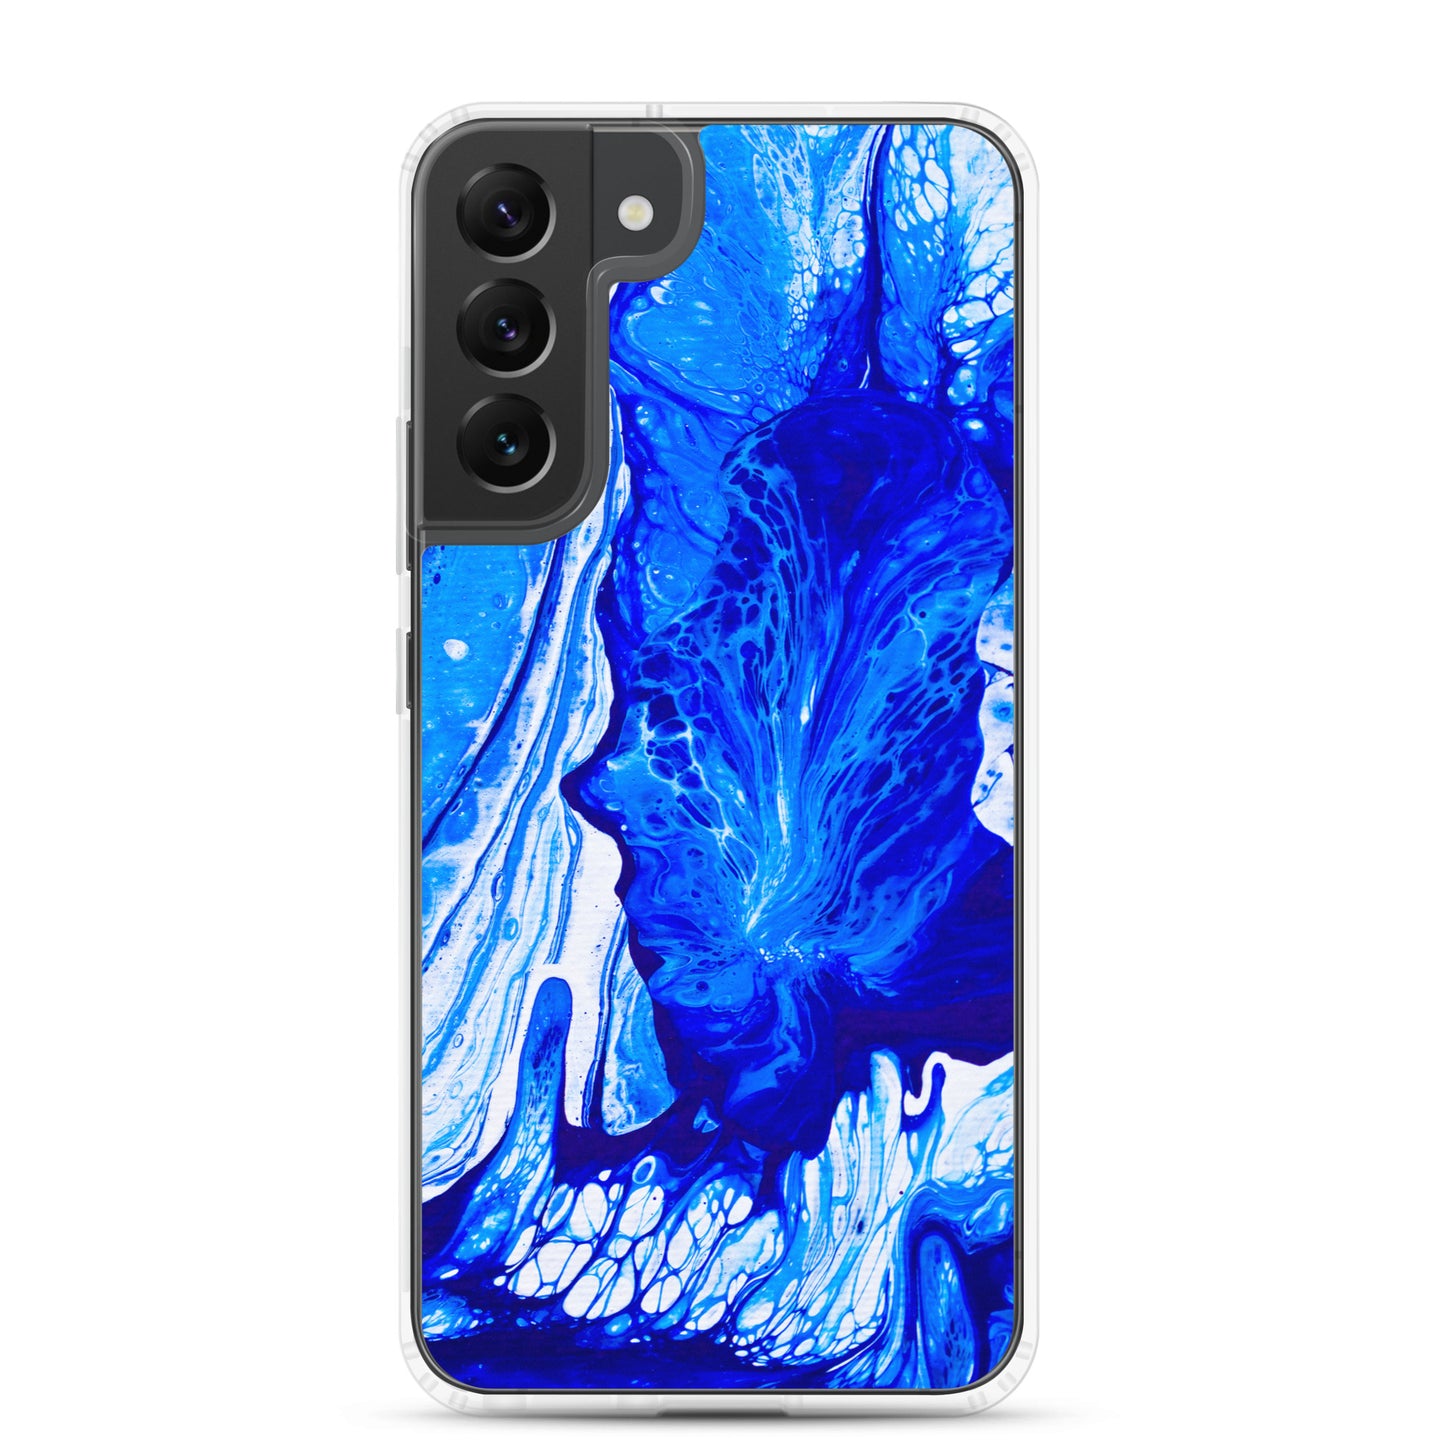 NightOwl Studio Custom Phone Case Compatible with Samsung Galaxy, Slim Cover for Wireless Charging, Drop and Scratch Resistant, Ms. Blue